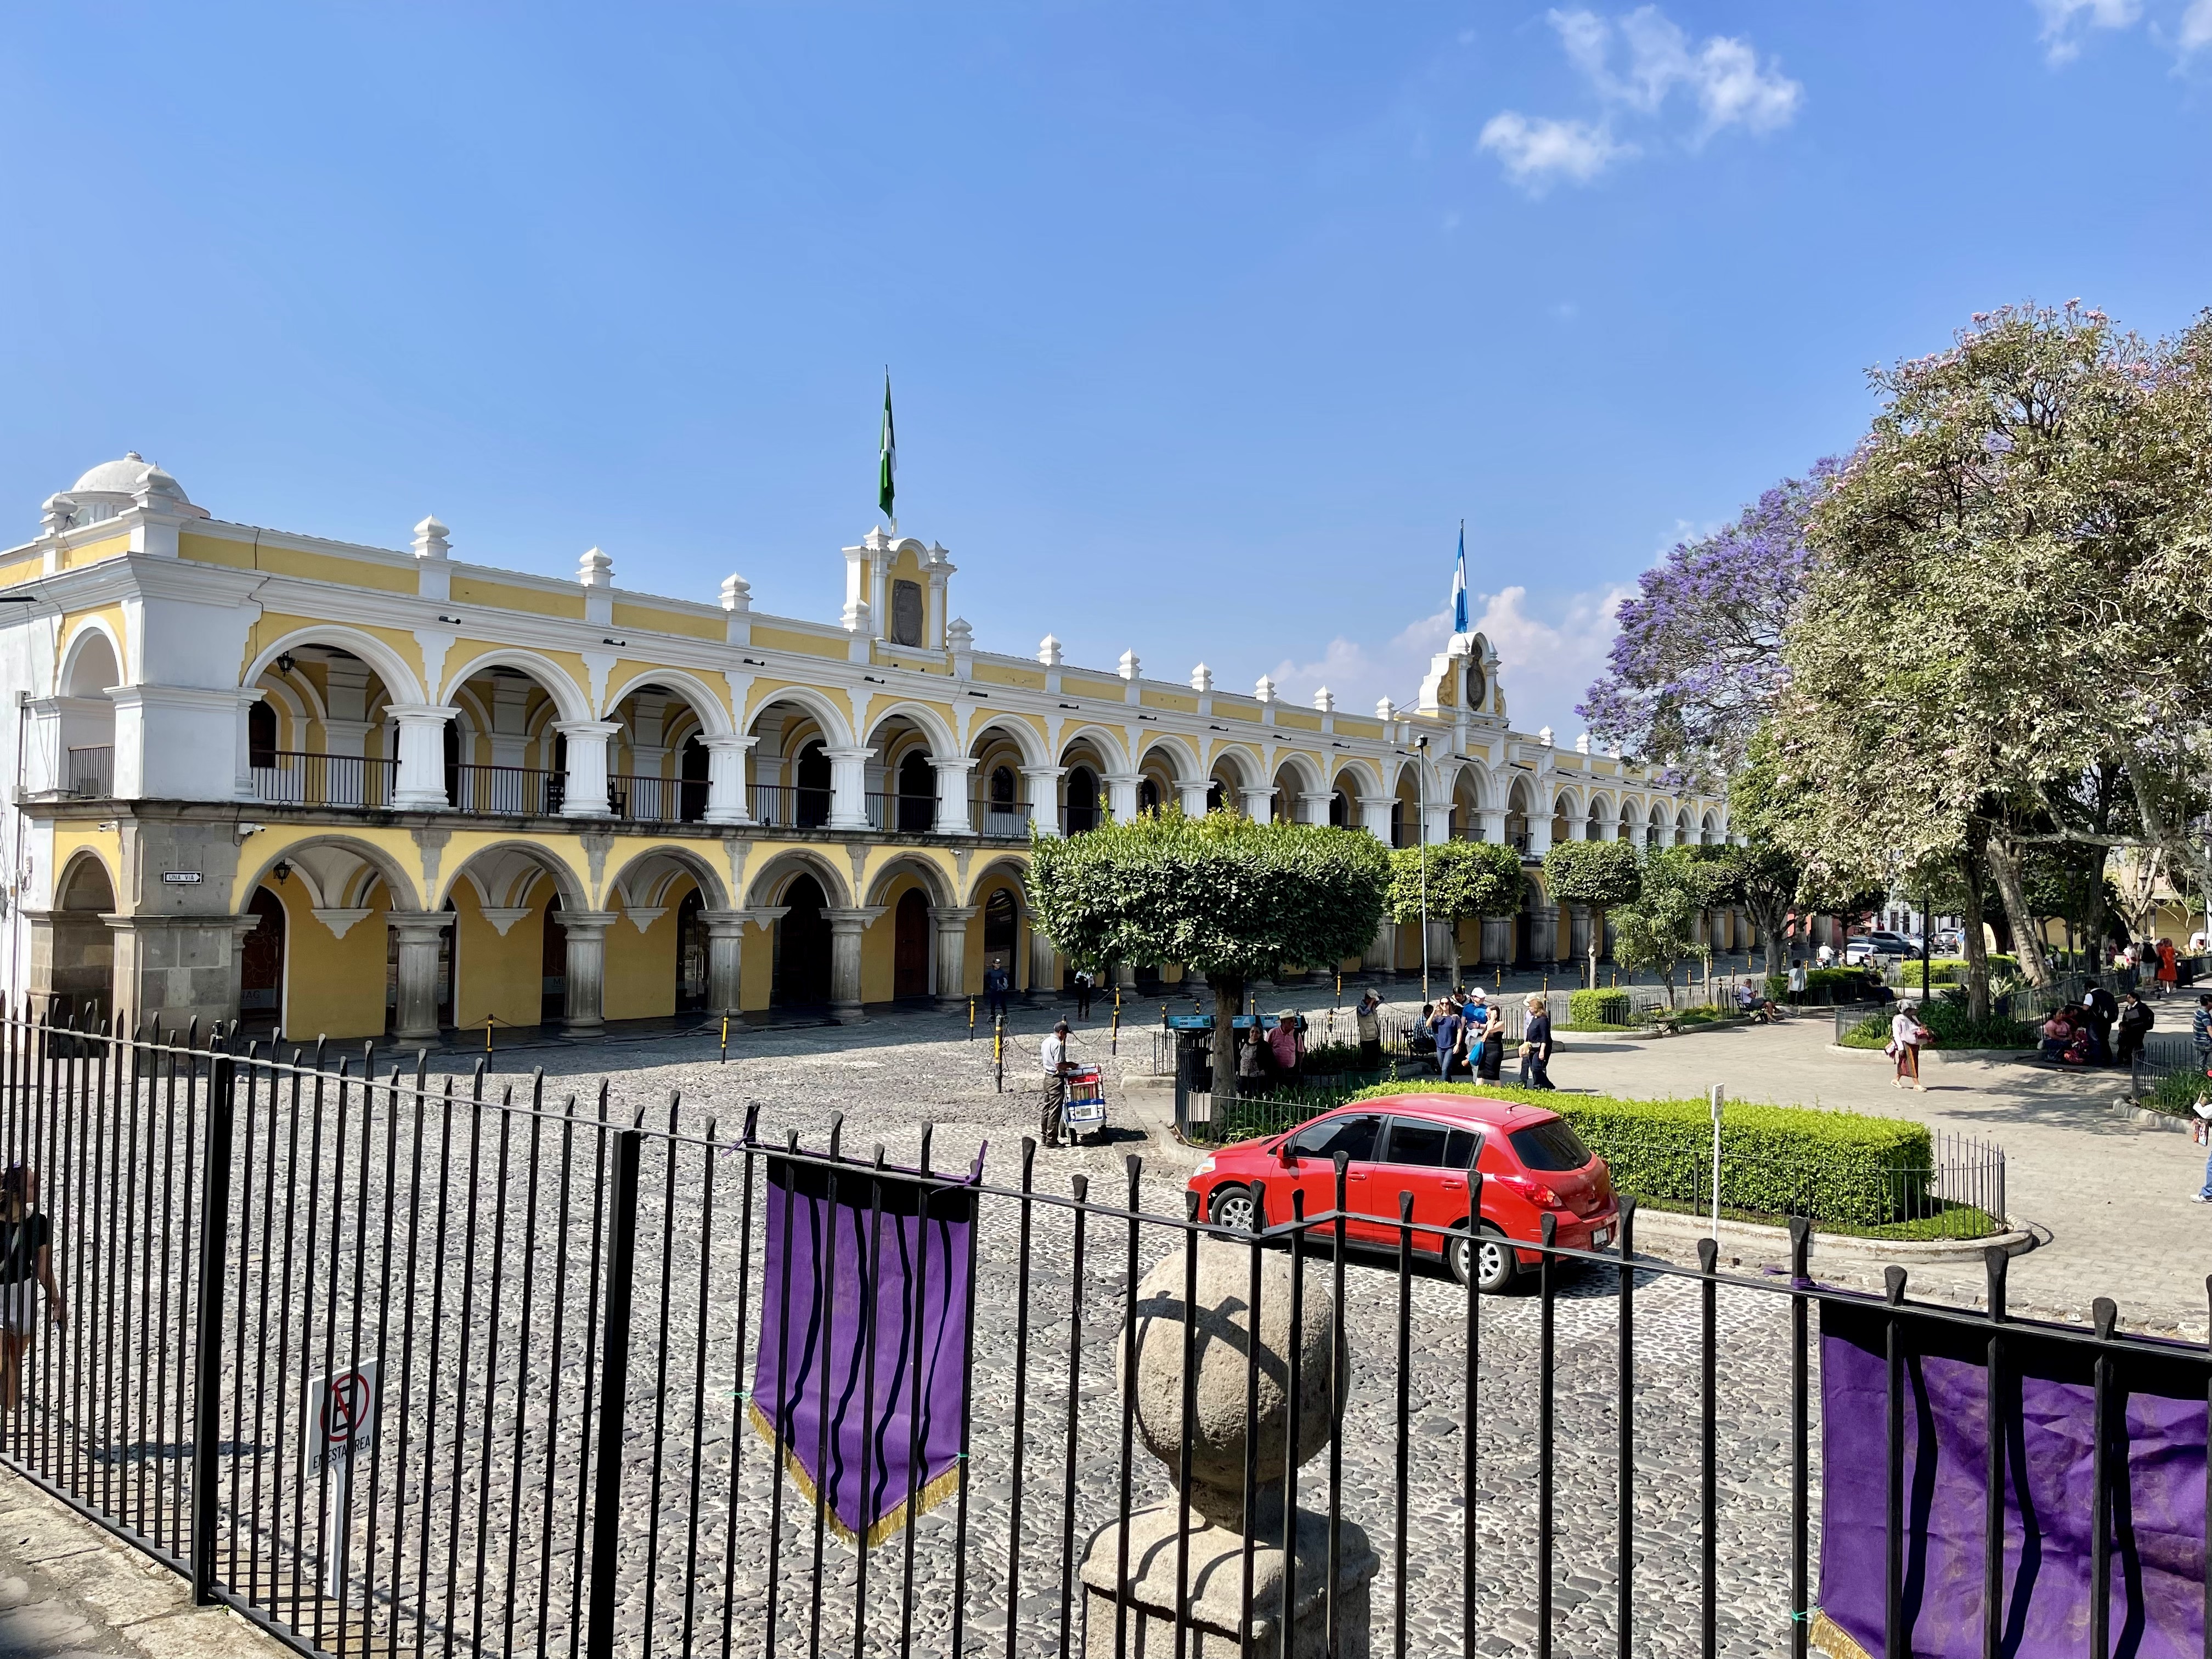 National Palace of Antiqua on Parque Central. ANNE SURCHIN